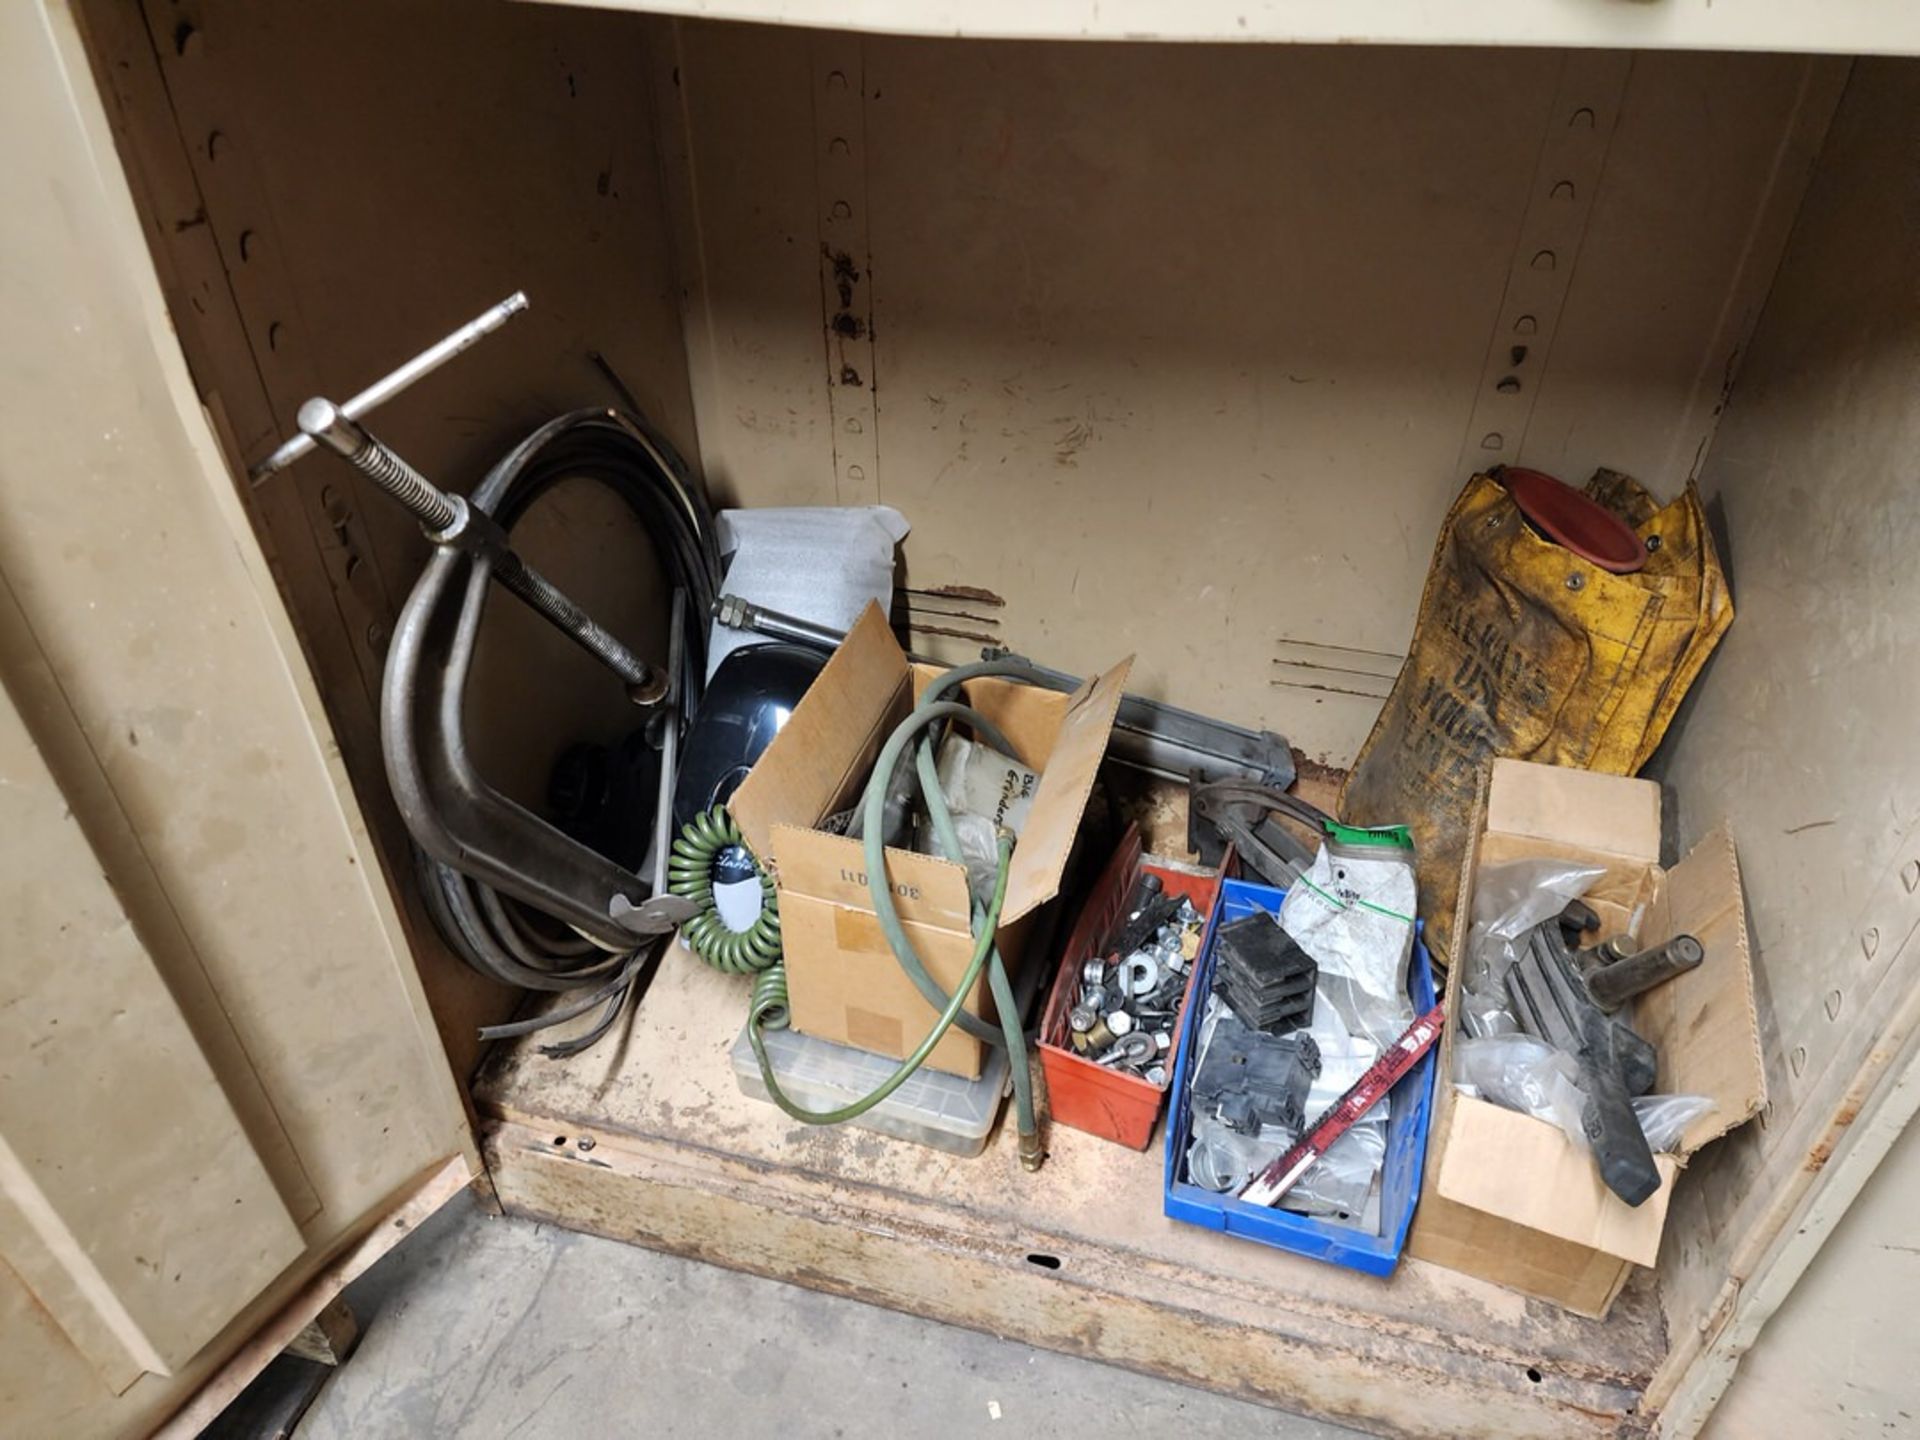 Contents Of Room To Include But Not Limited To: (4) Matl. Lockers, Assoreted Ele Components, - Image 29 of 58